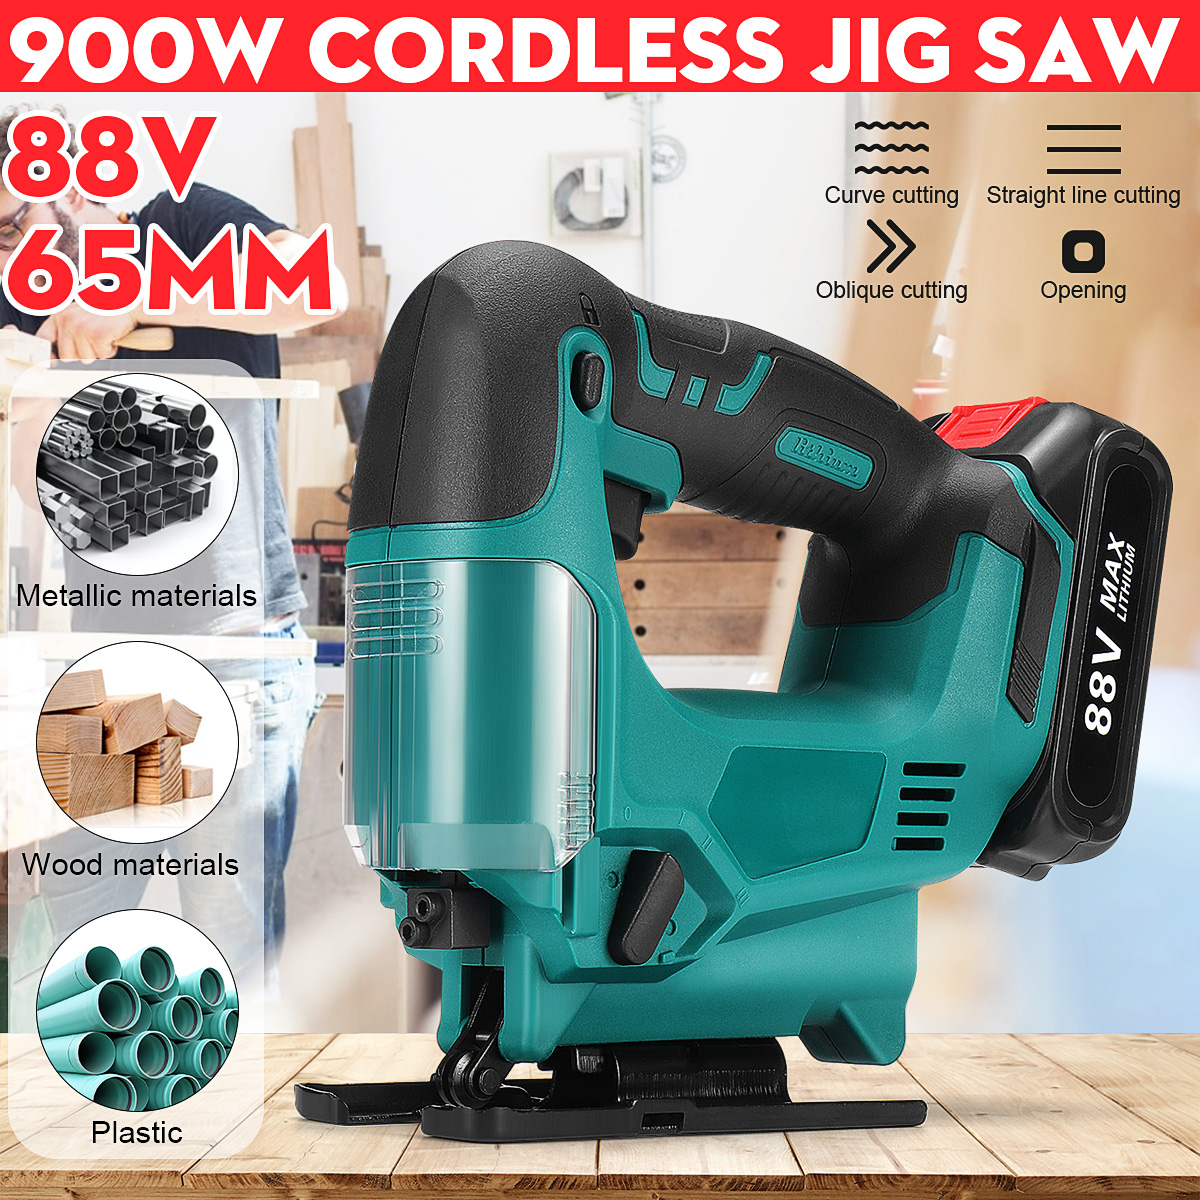 88VF-Wireless-Electric-Jig-Saw-Rechargeable-Portable-Woodworking-Wood-Plastic-Aluminium-Cutting-Tool-1880981-2